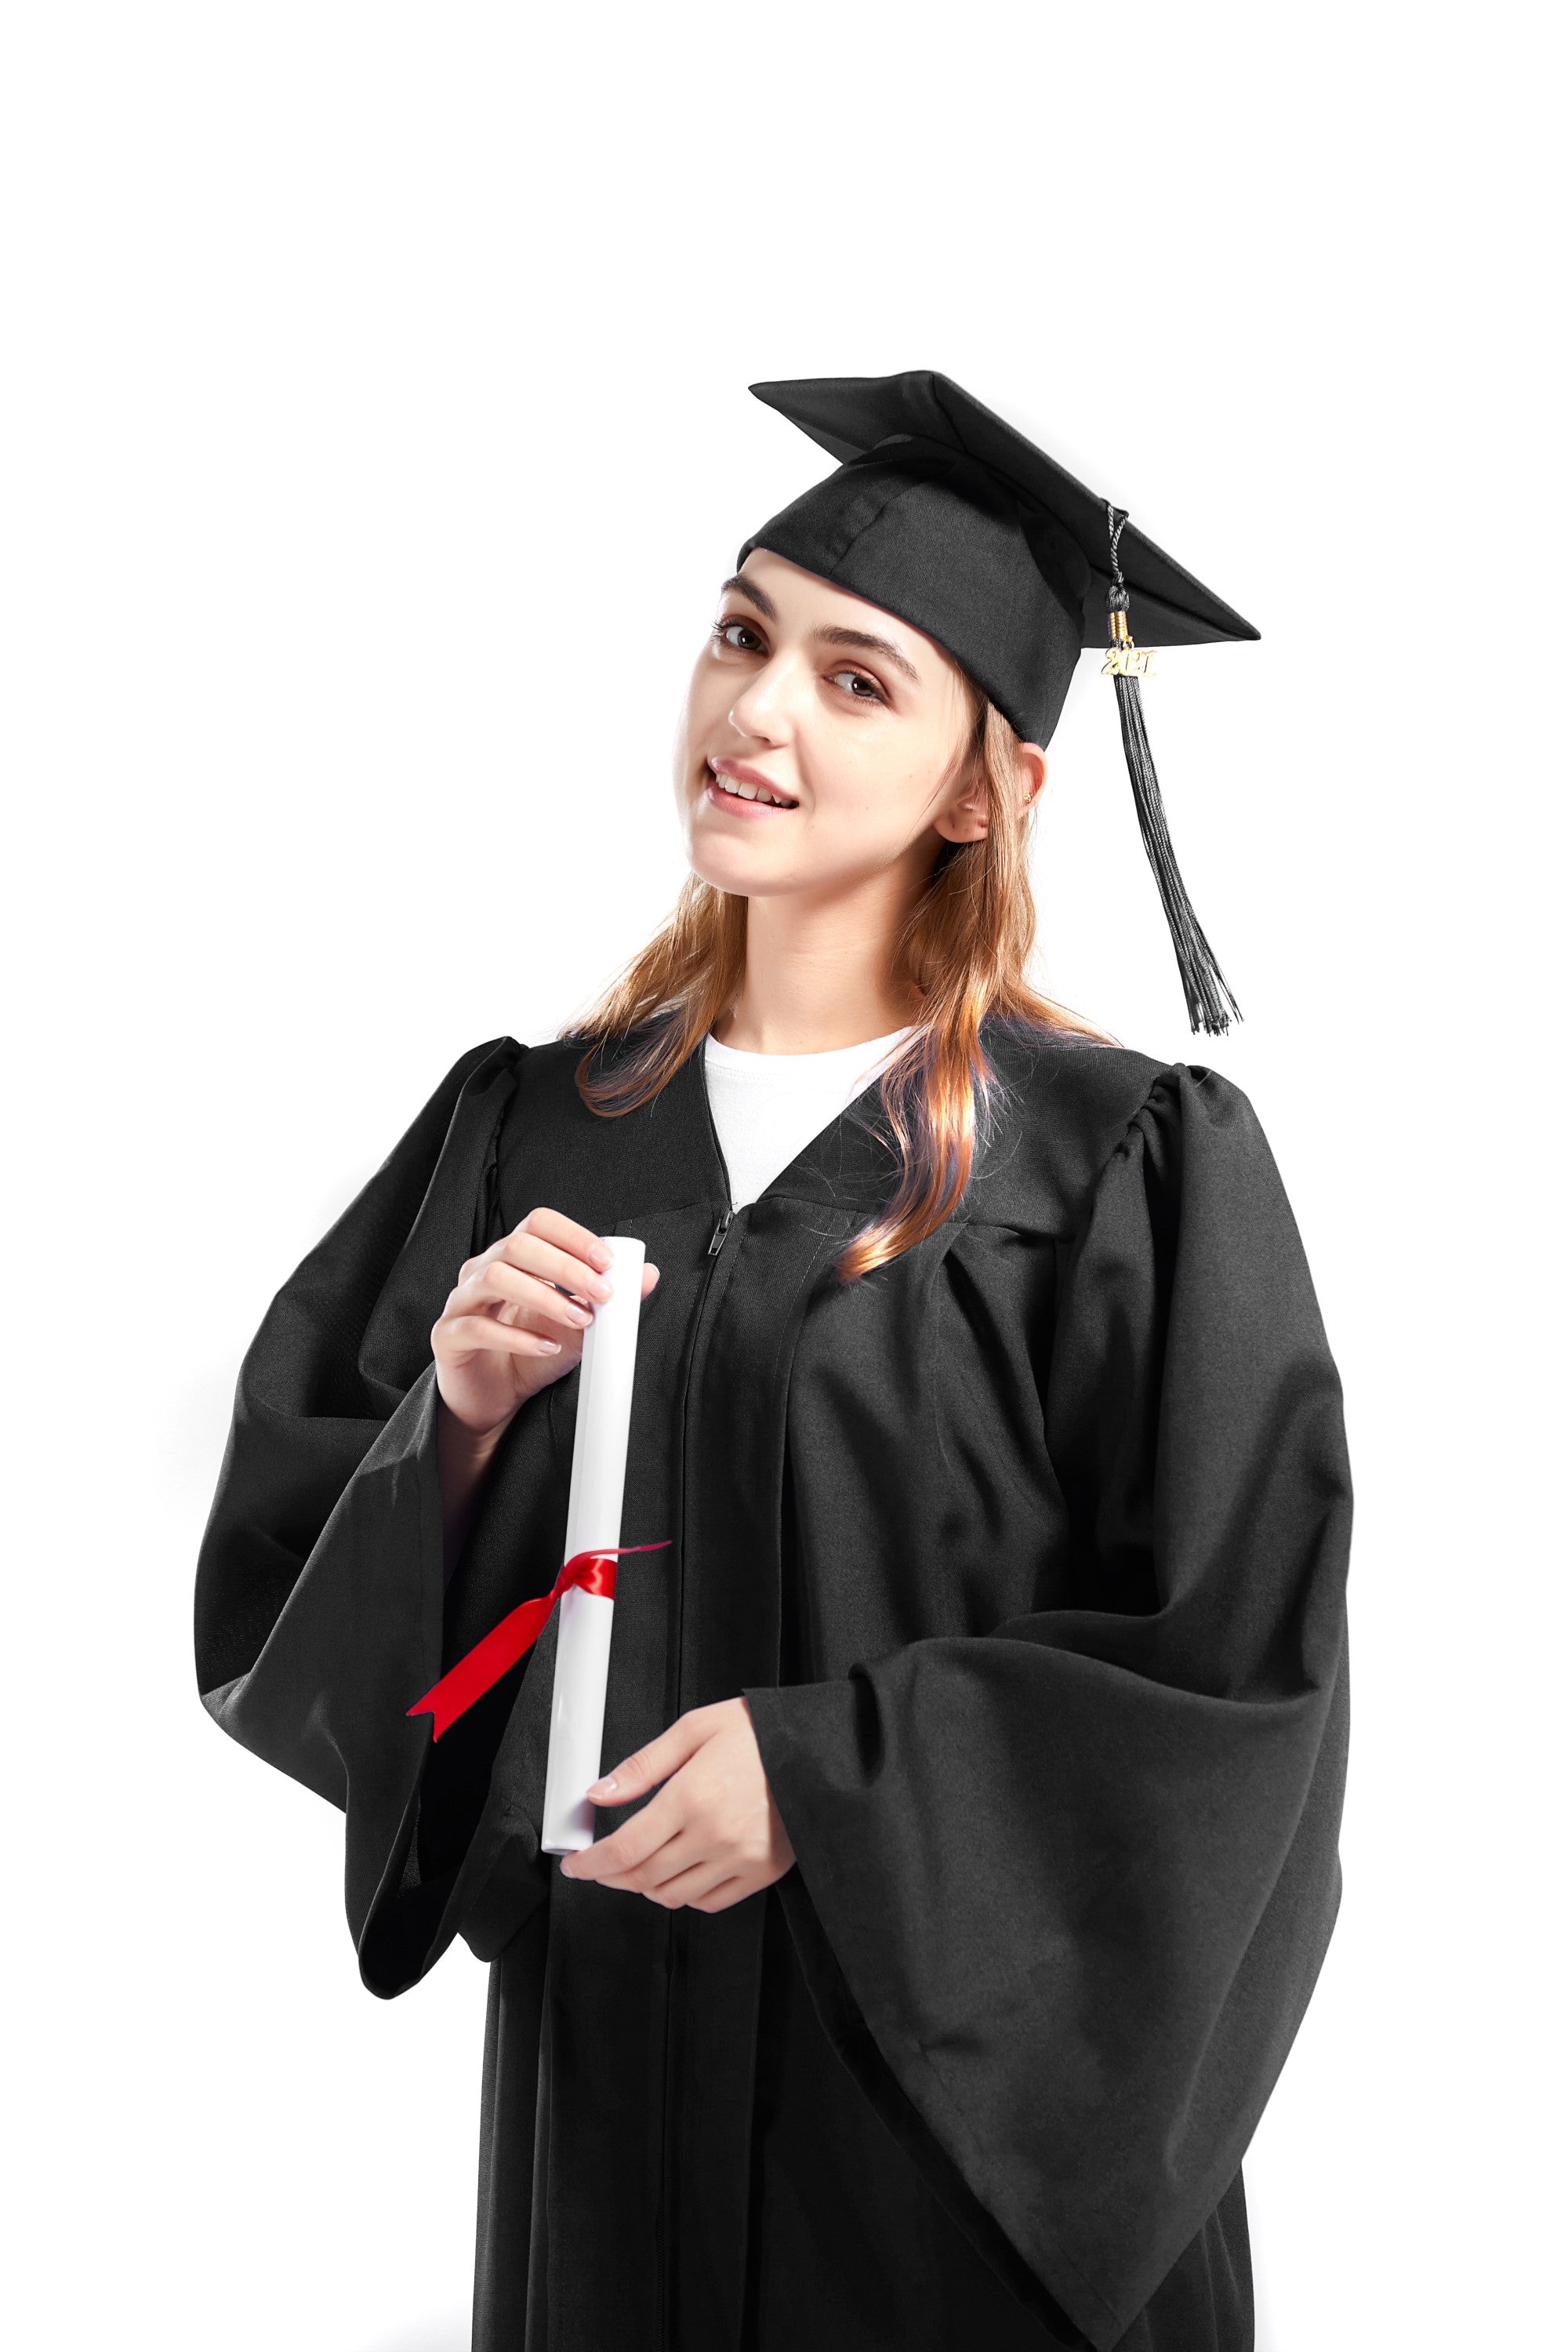 Portrait of a Girl in Graduation Gown · Free Stock Photo